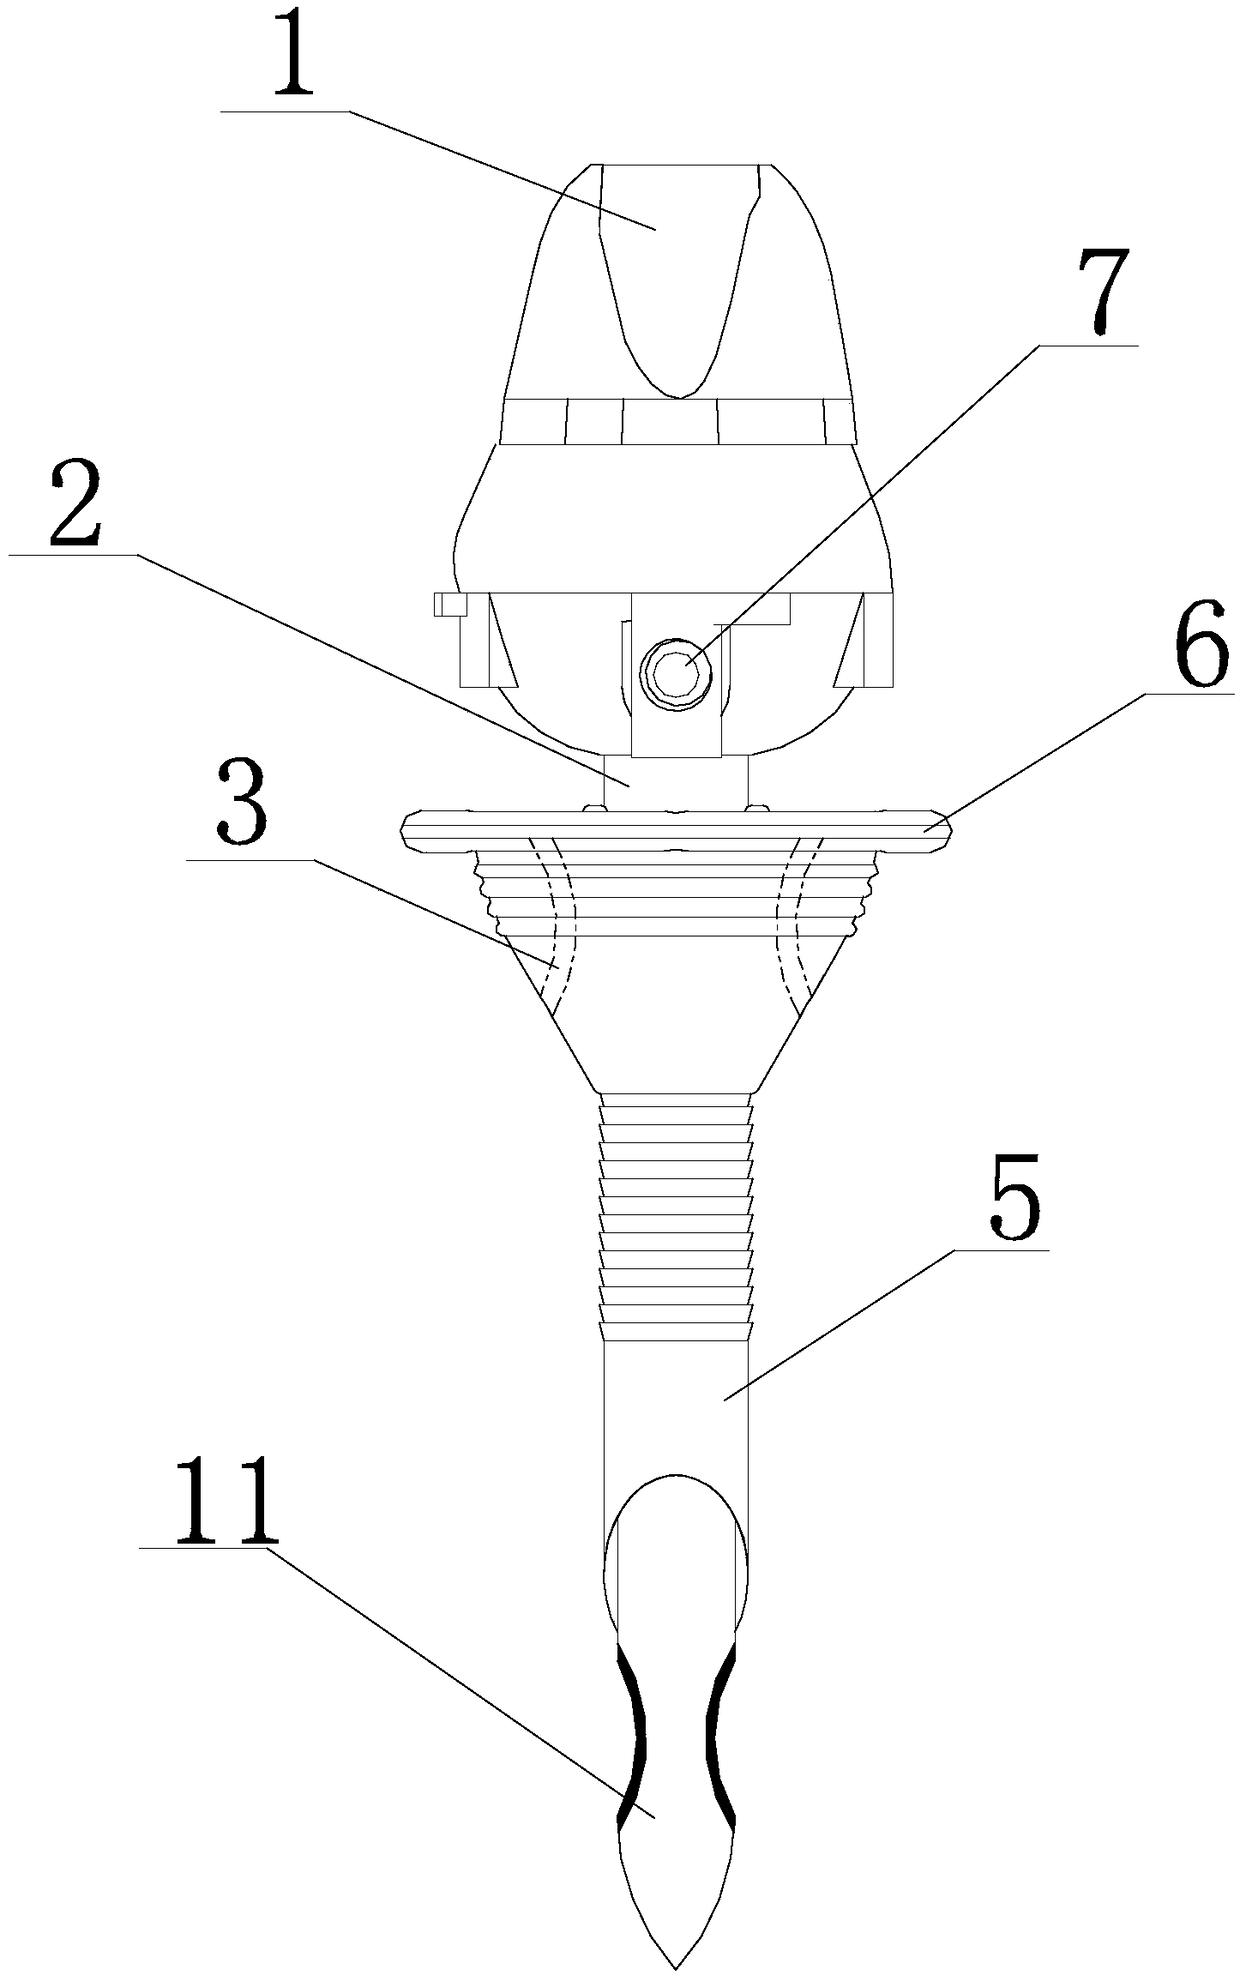 Endoscope puncture and suturing instrument